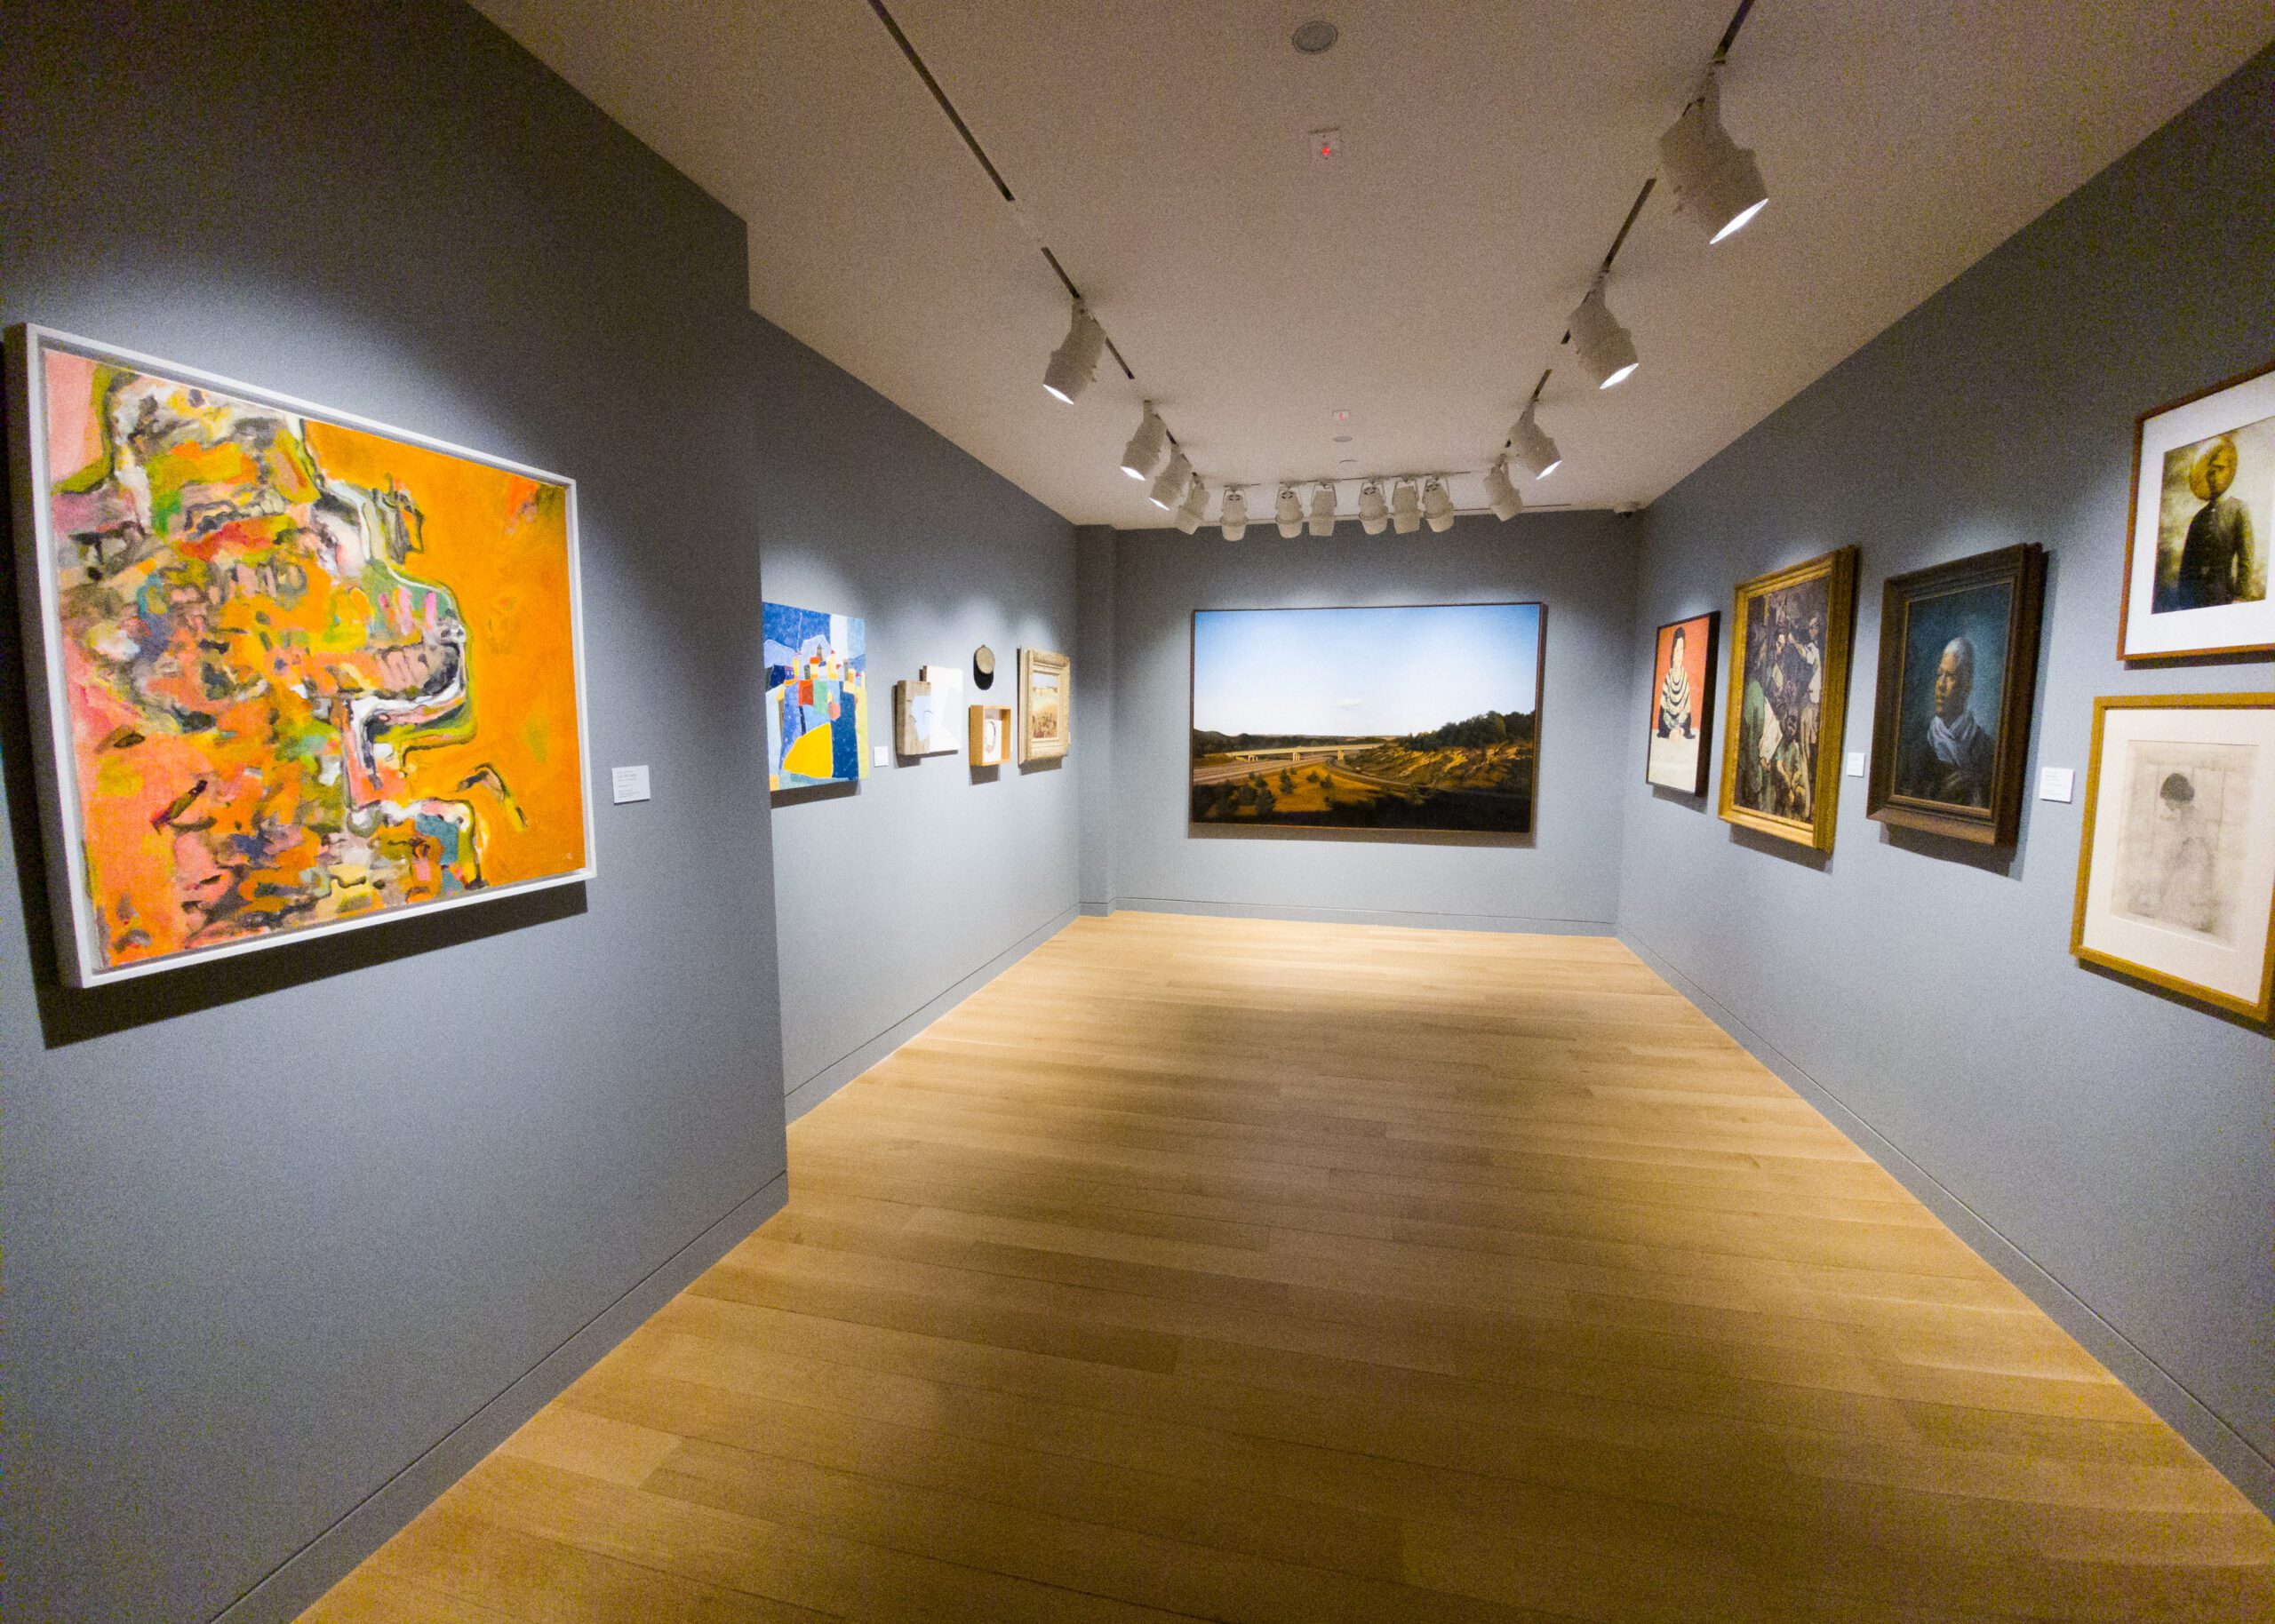 Photograph of a museum gallery room with various paintings hanging on a grey wall.